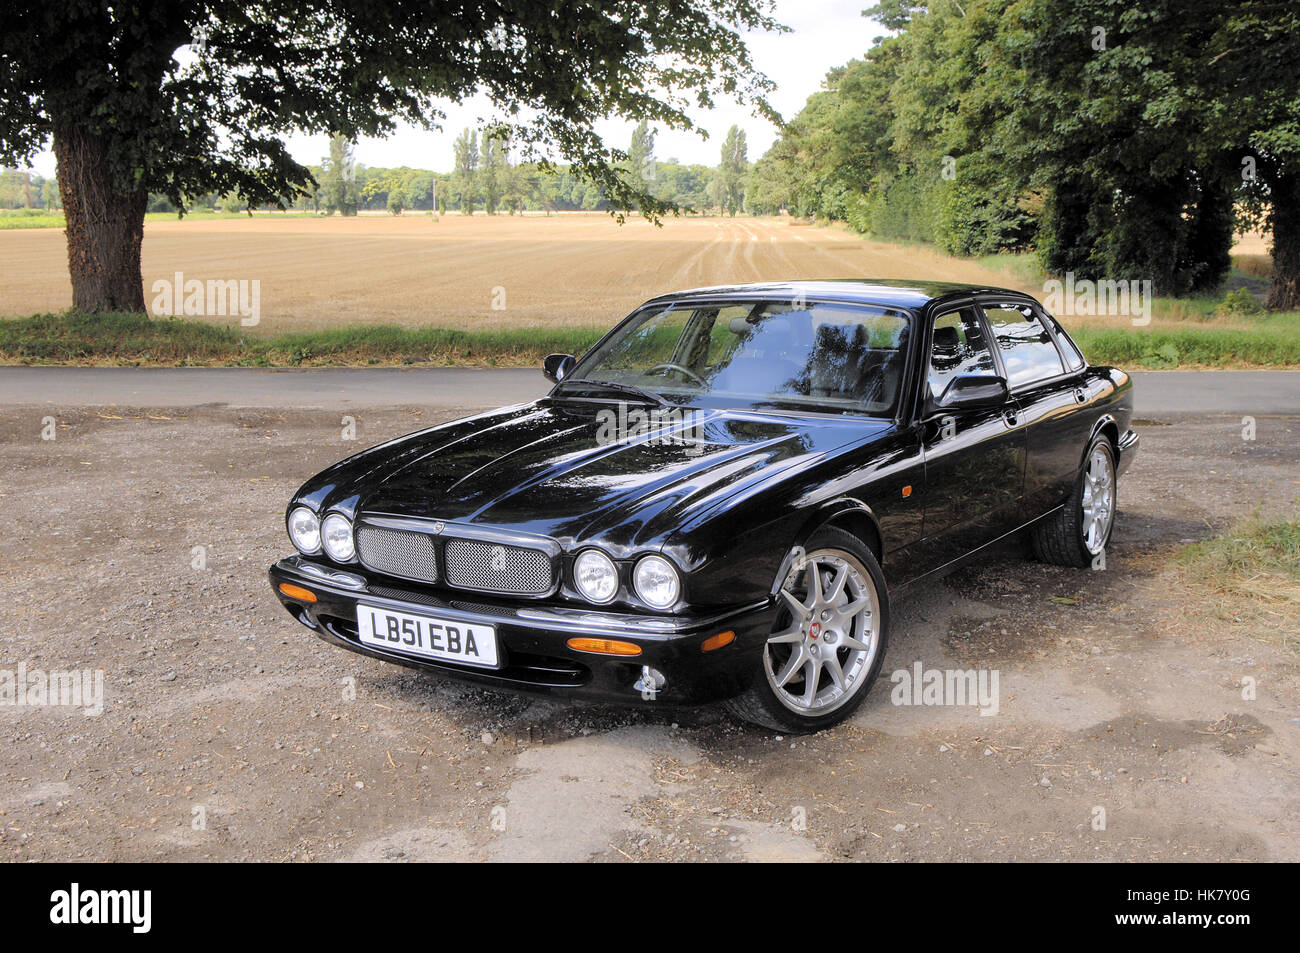 Jaguar XJR100 black car parked with trees Stock Photo